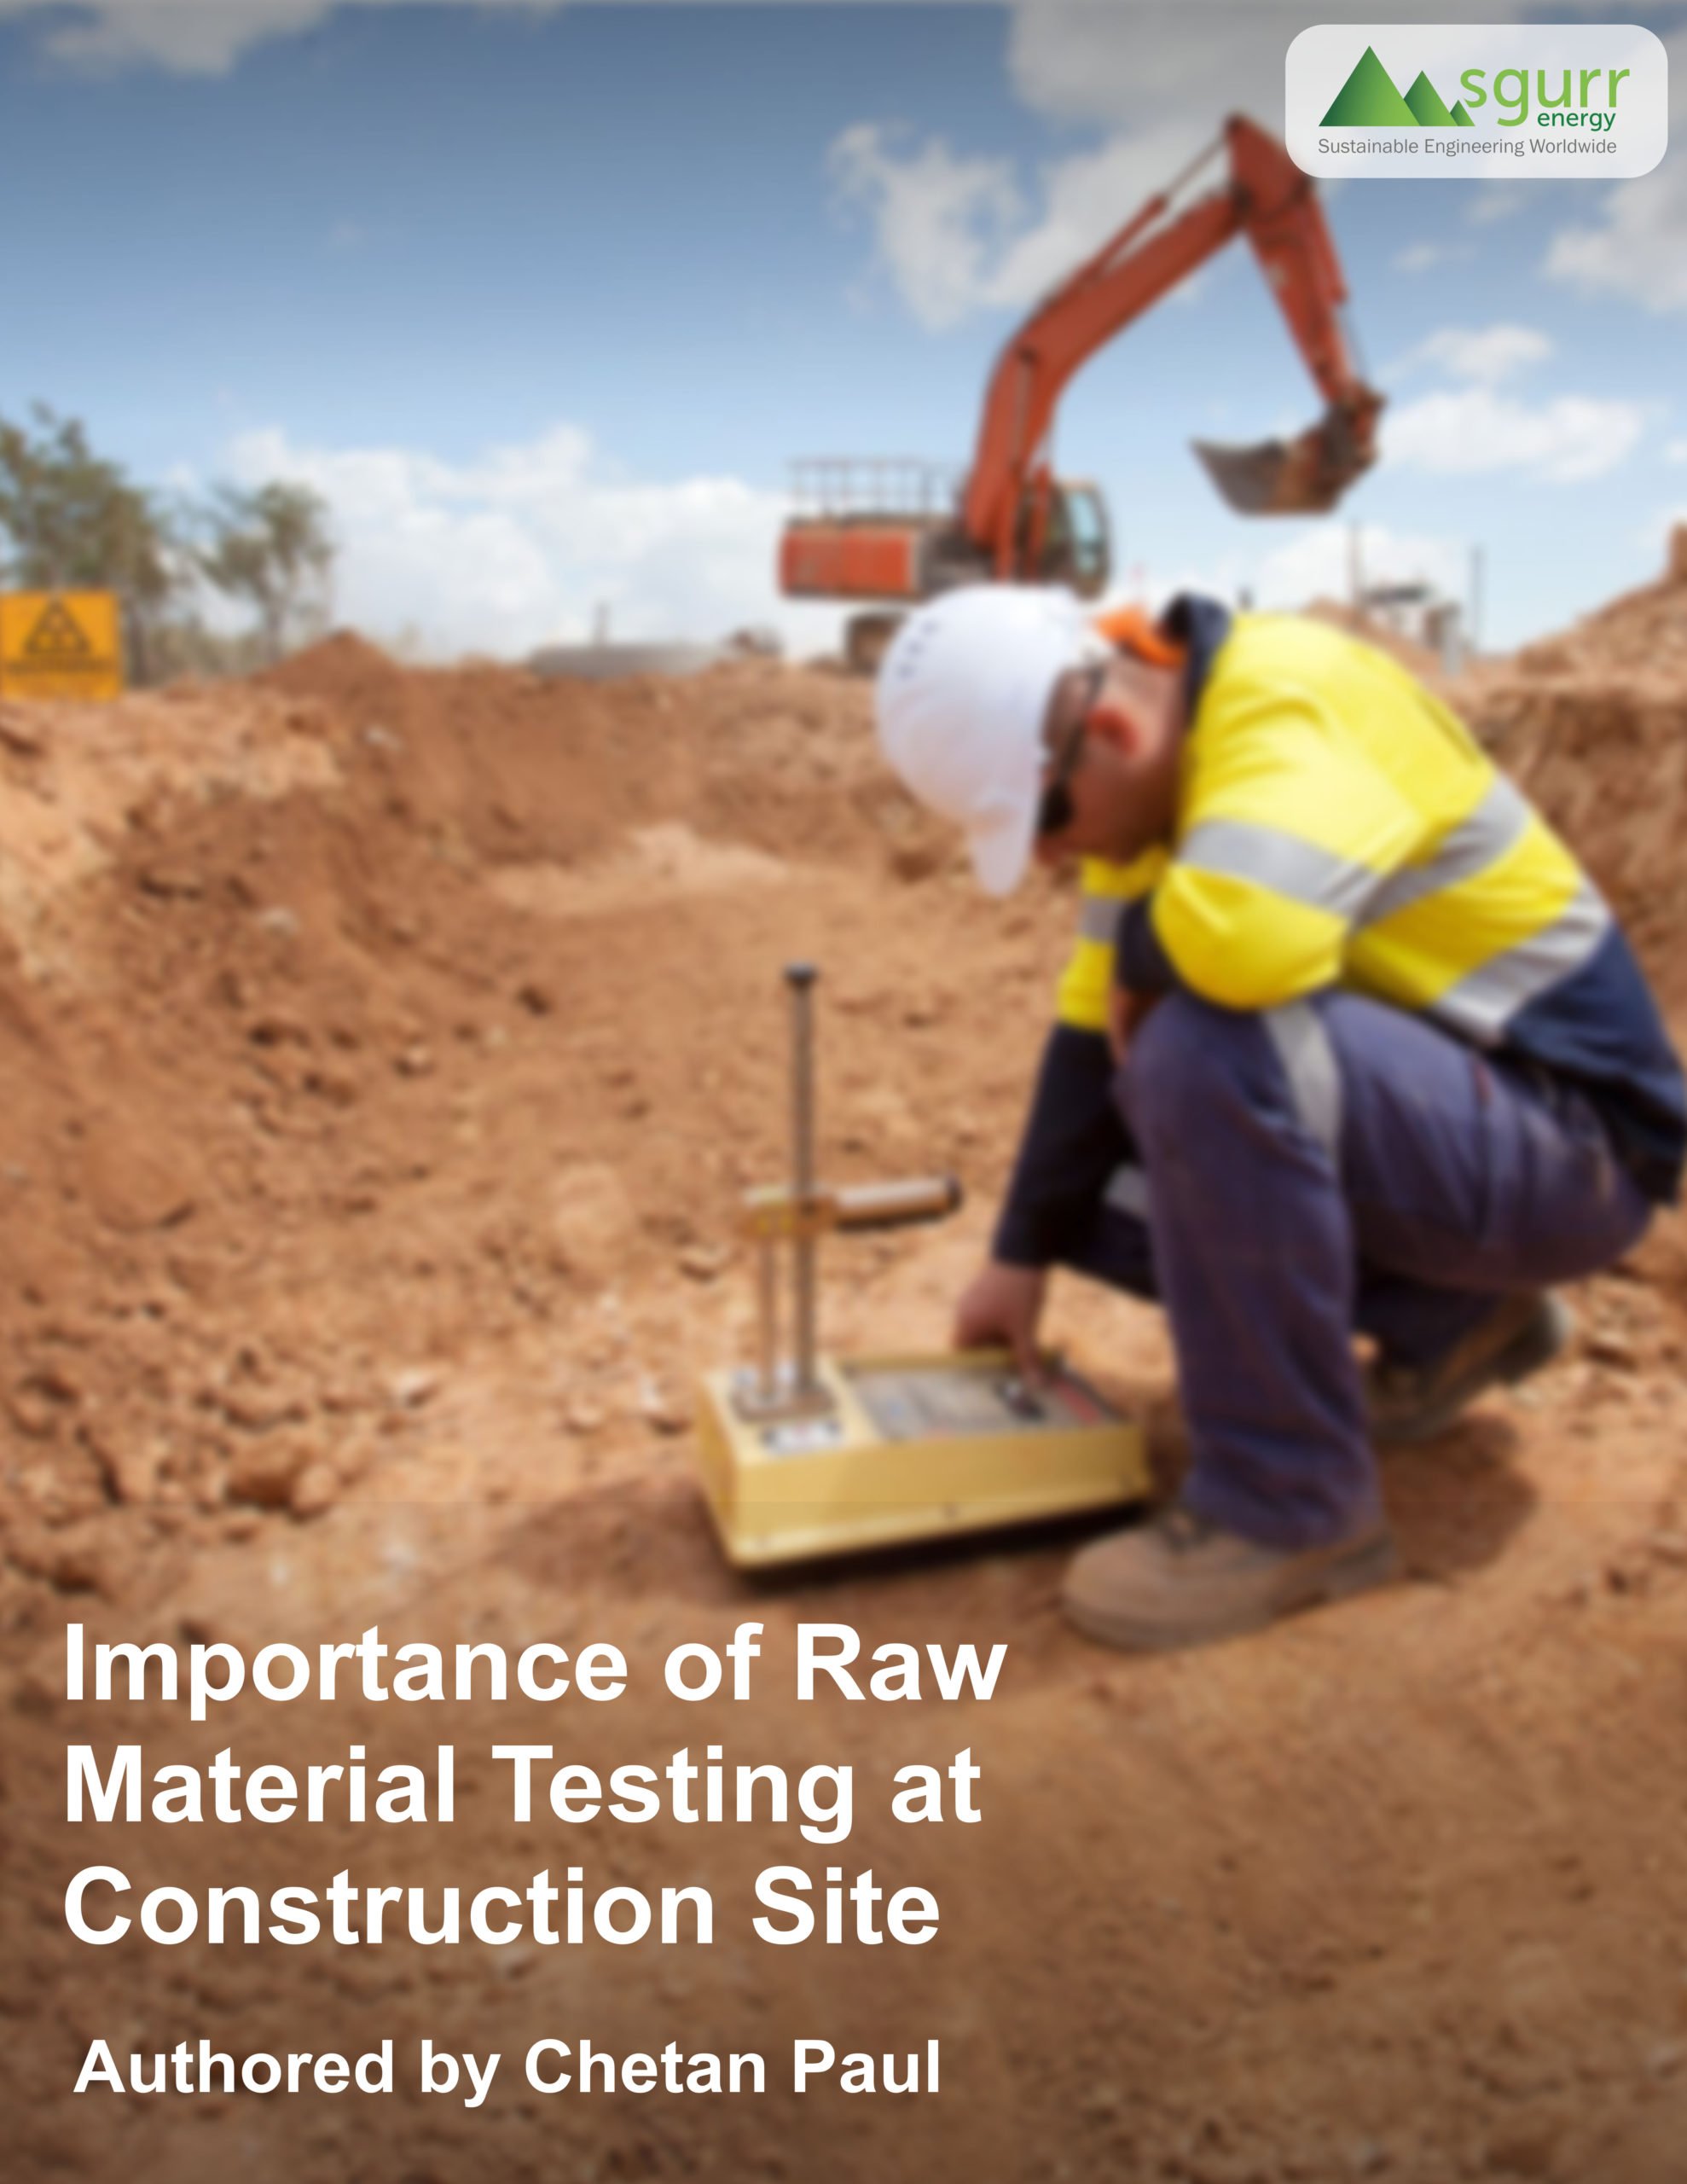 Importance of Raw Material testing at Construction Sites